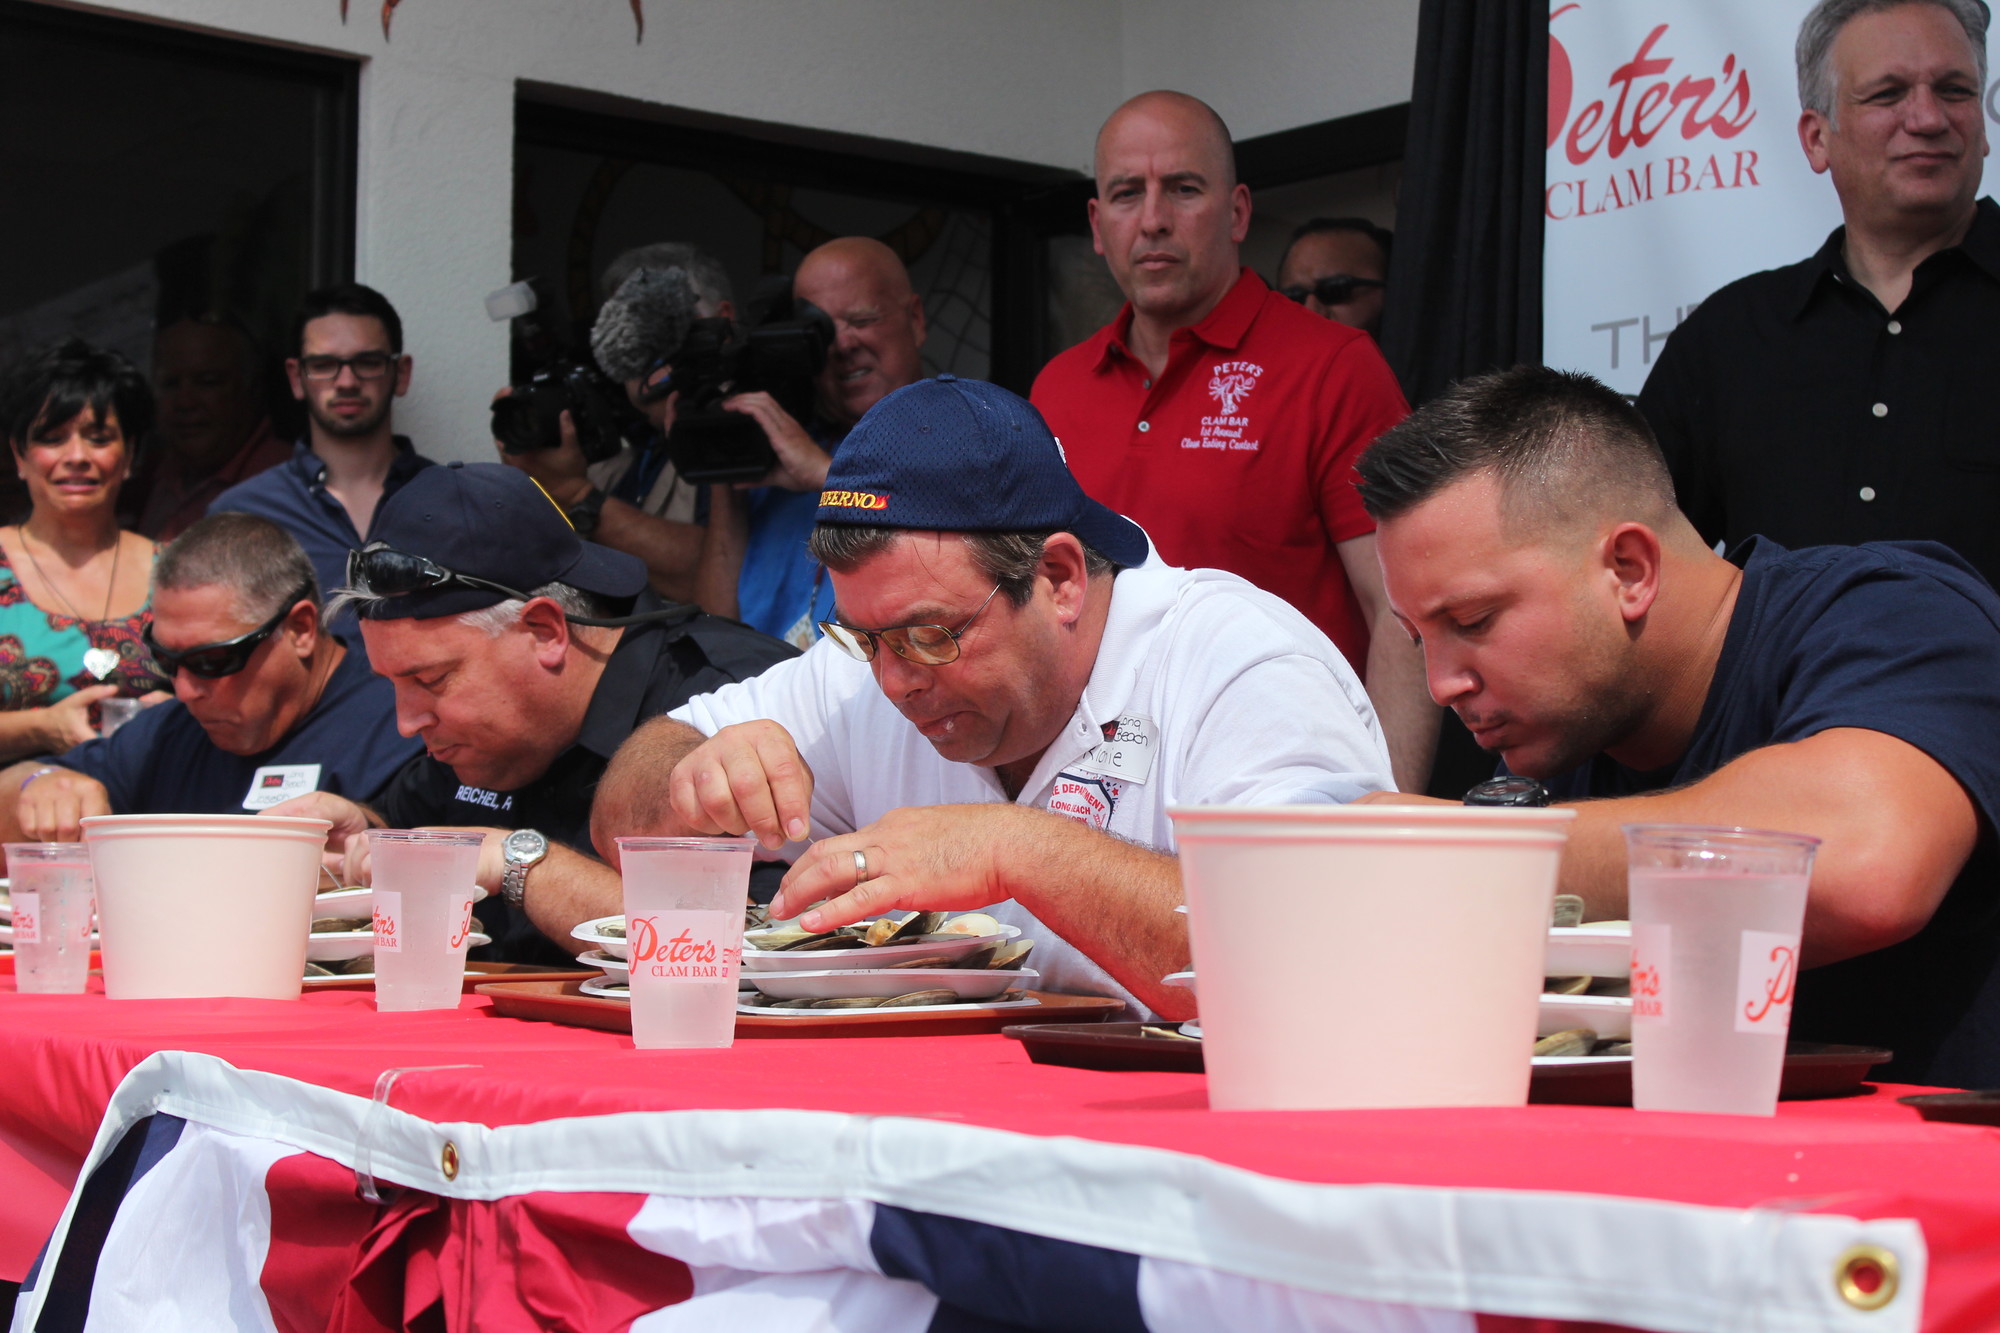 Firemen from several South Shore fire departments participated in the first Clam Eating Contest at Peter’s Clam bar in Island Park.